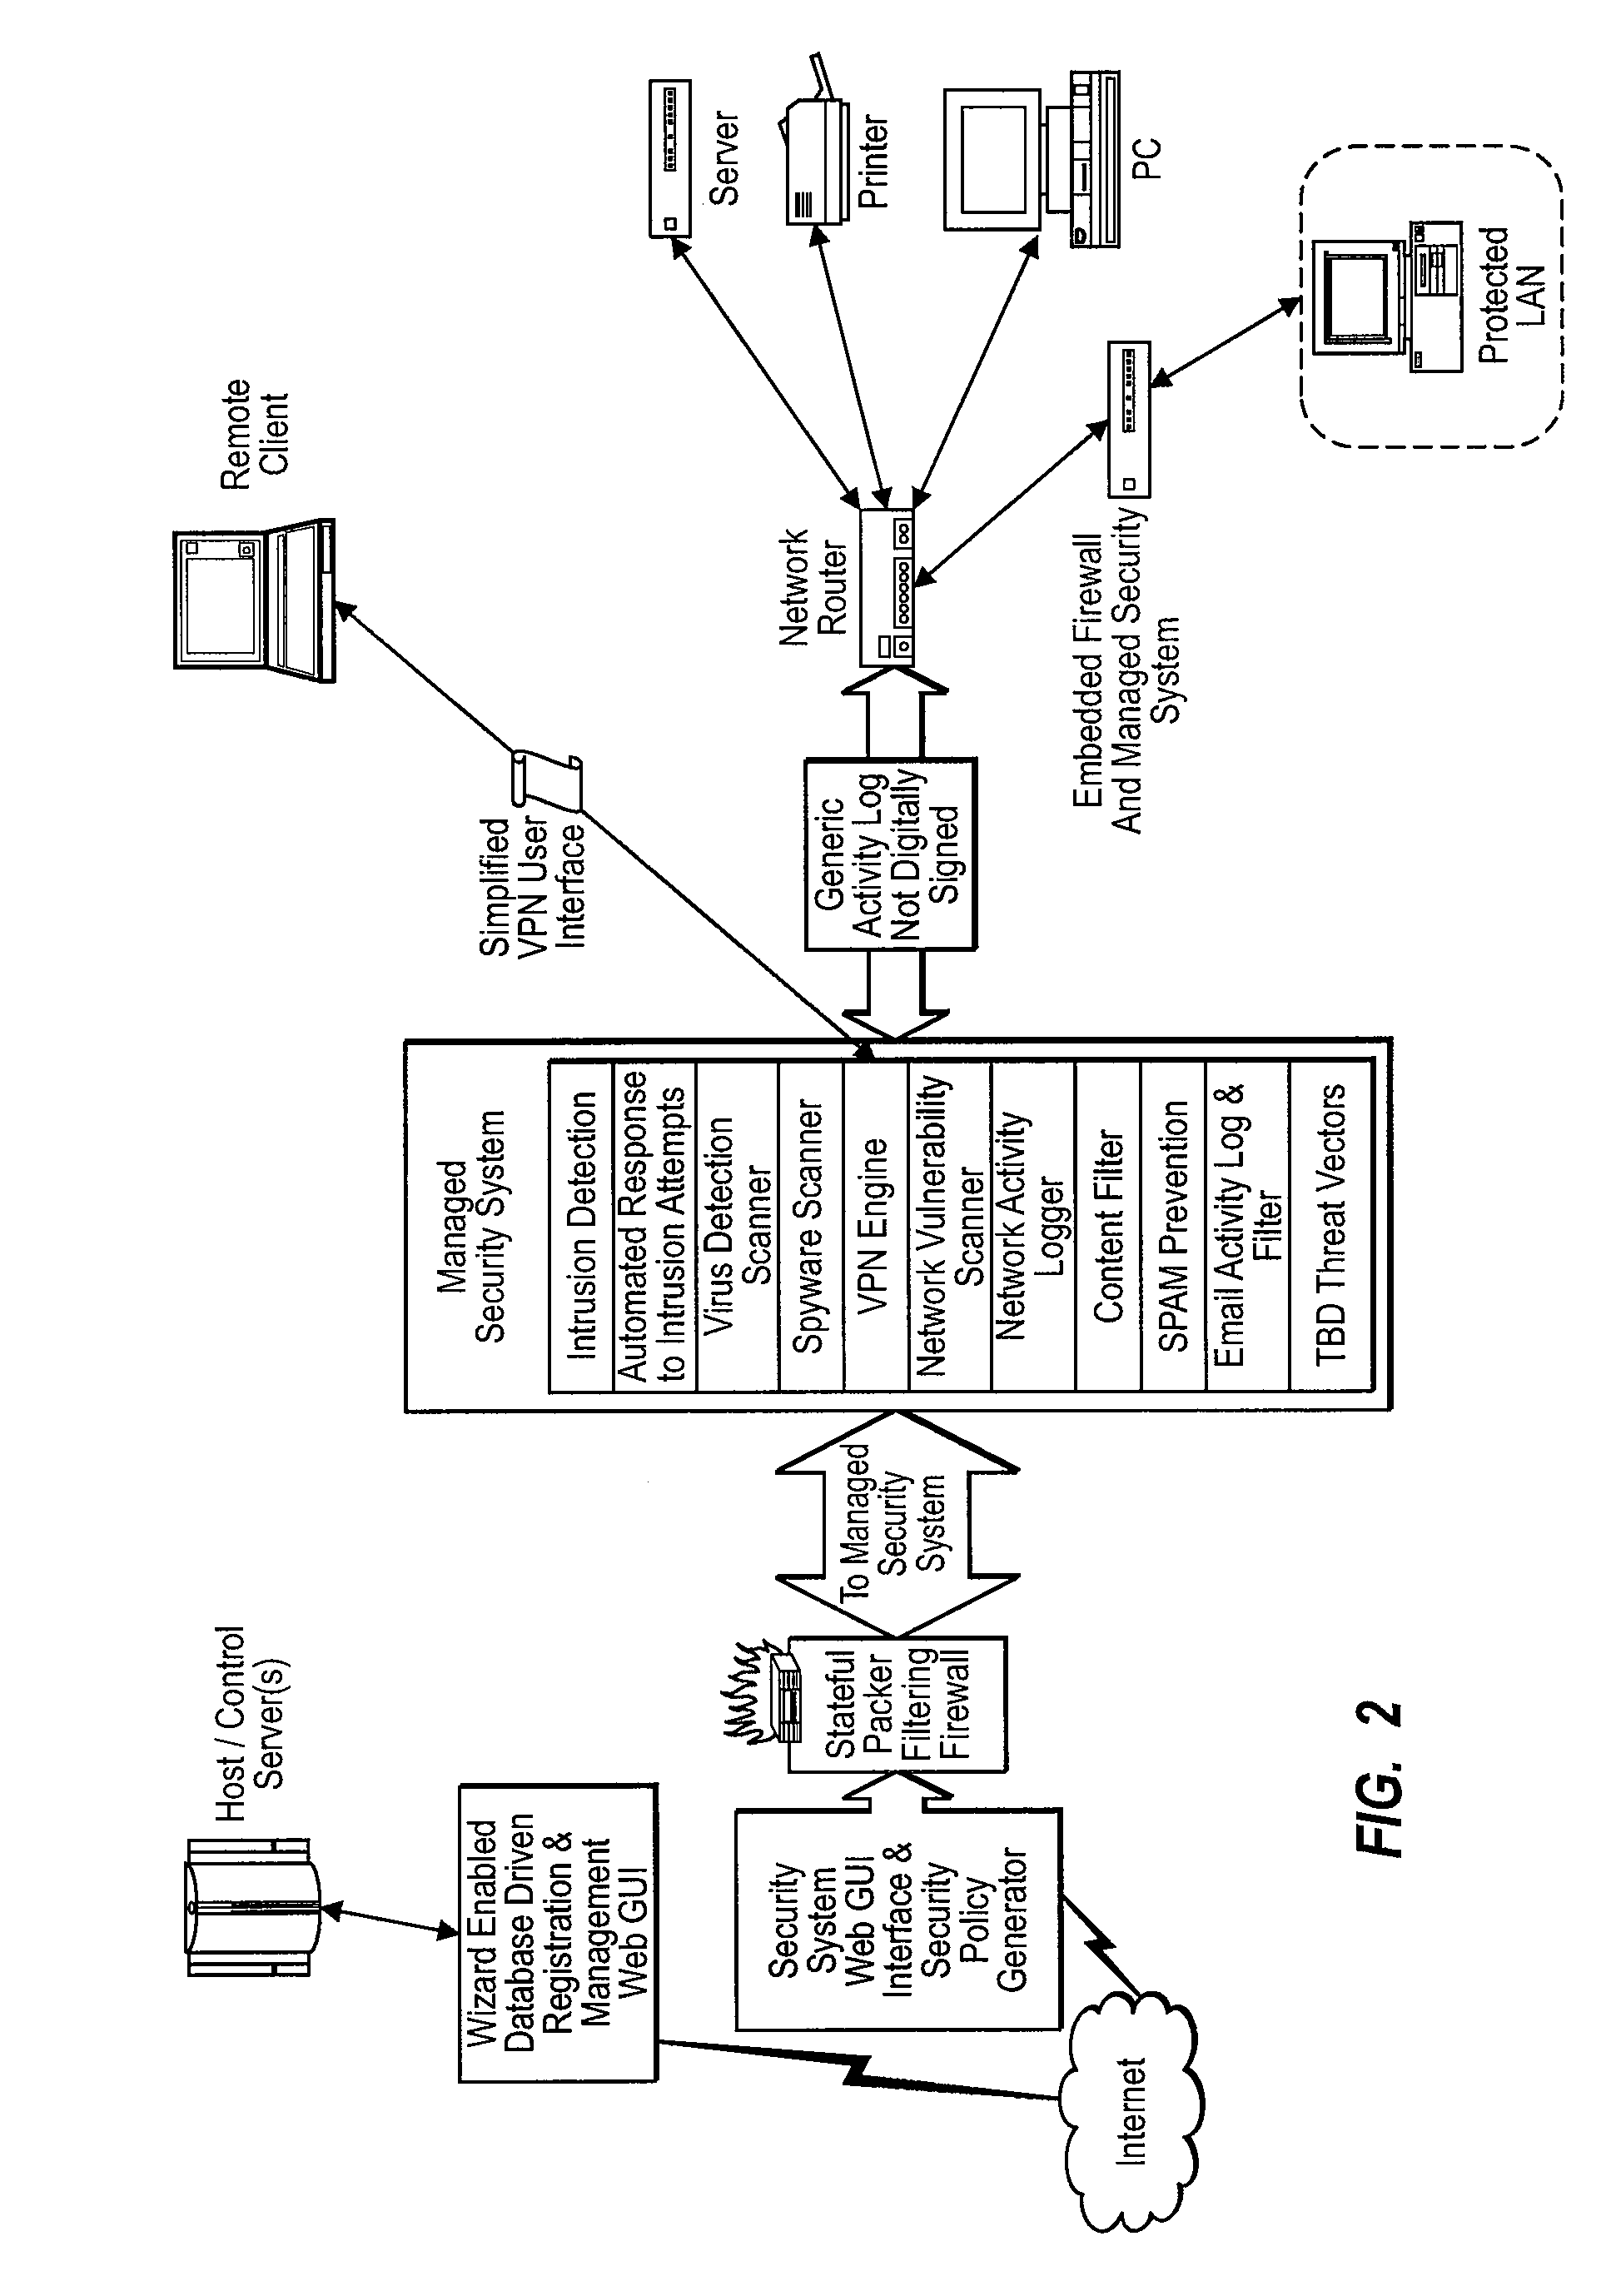 Methods and Systems for Comprehensive Management of Internet and Computer Network Security Threats